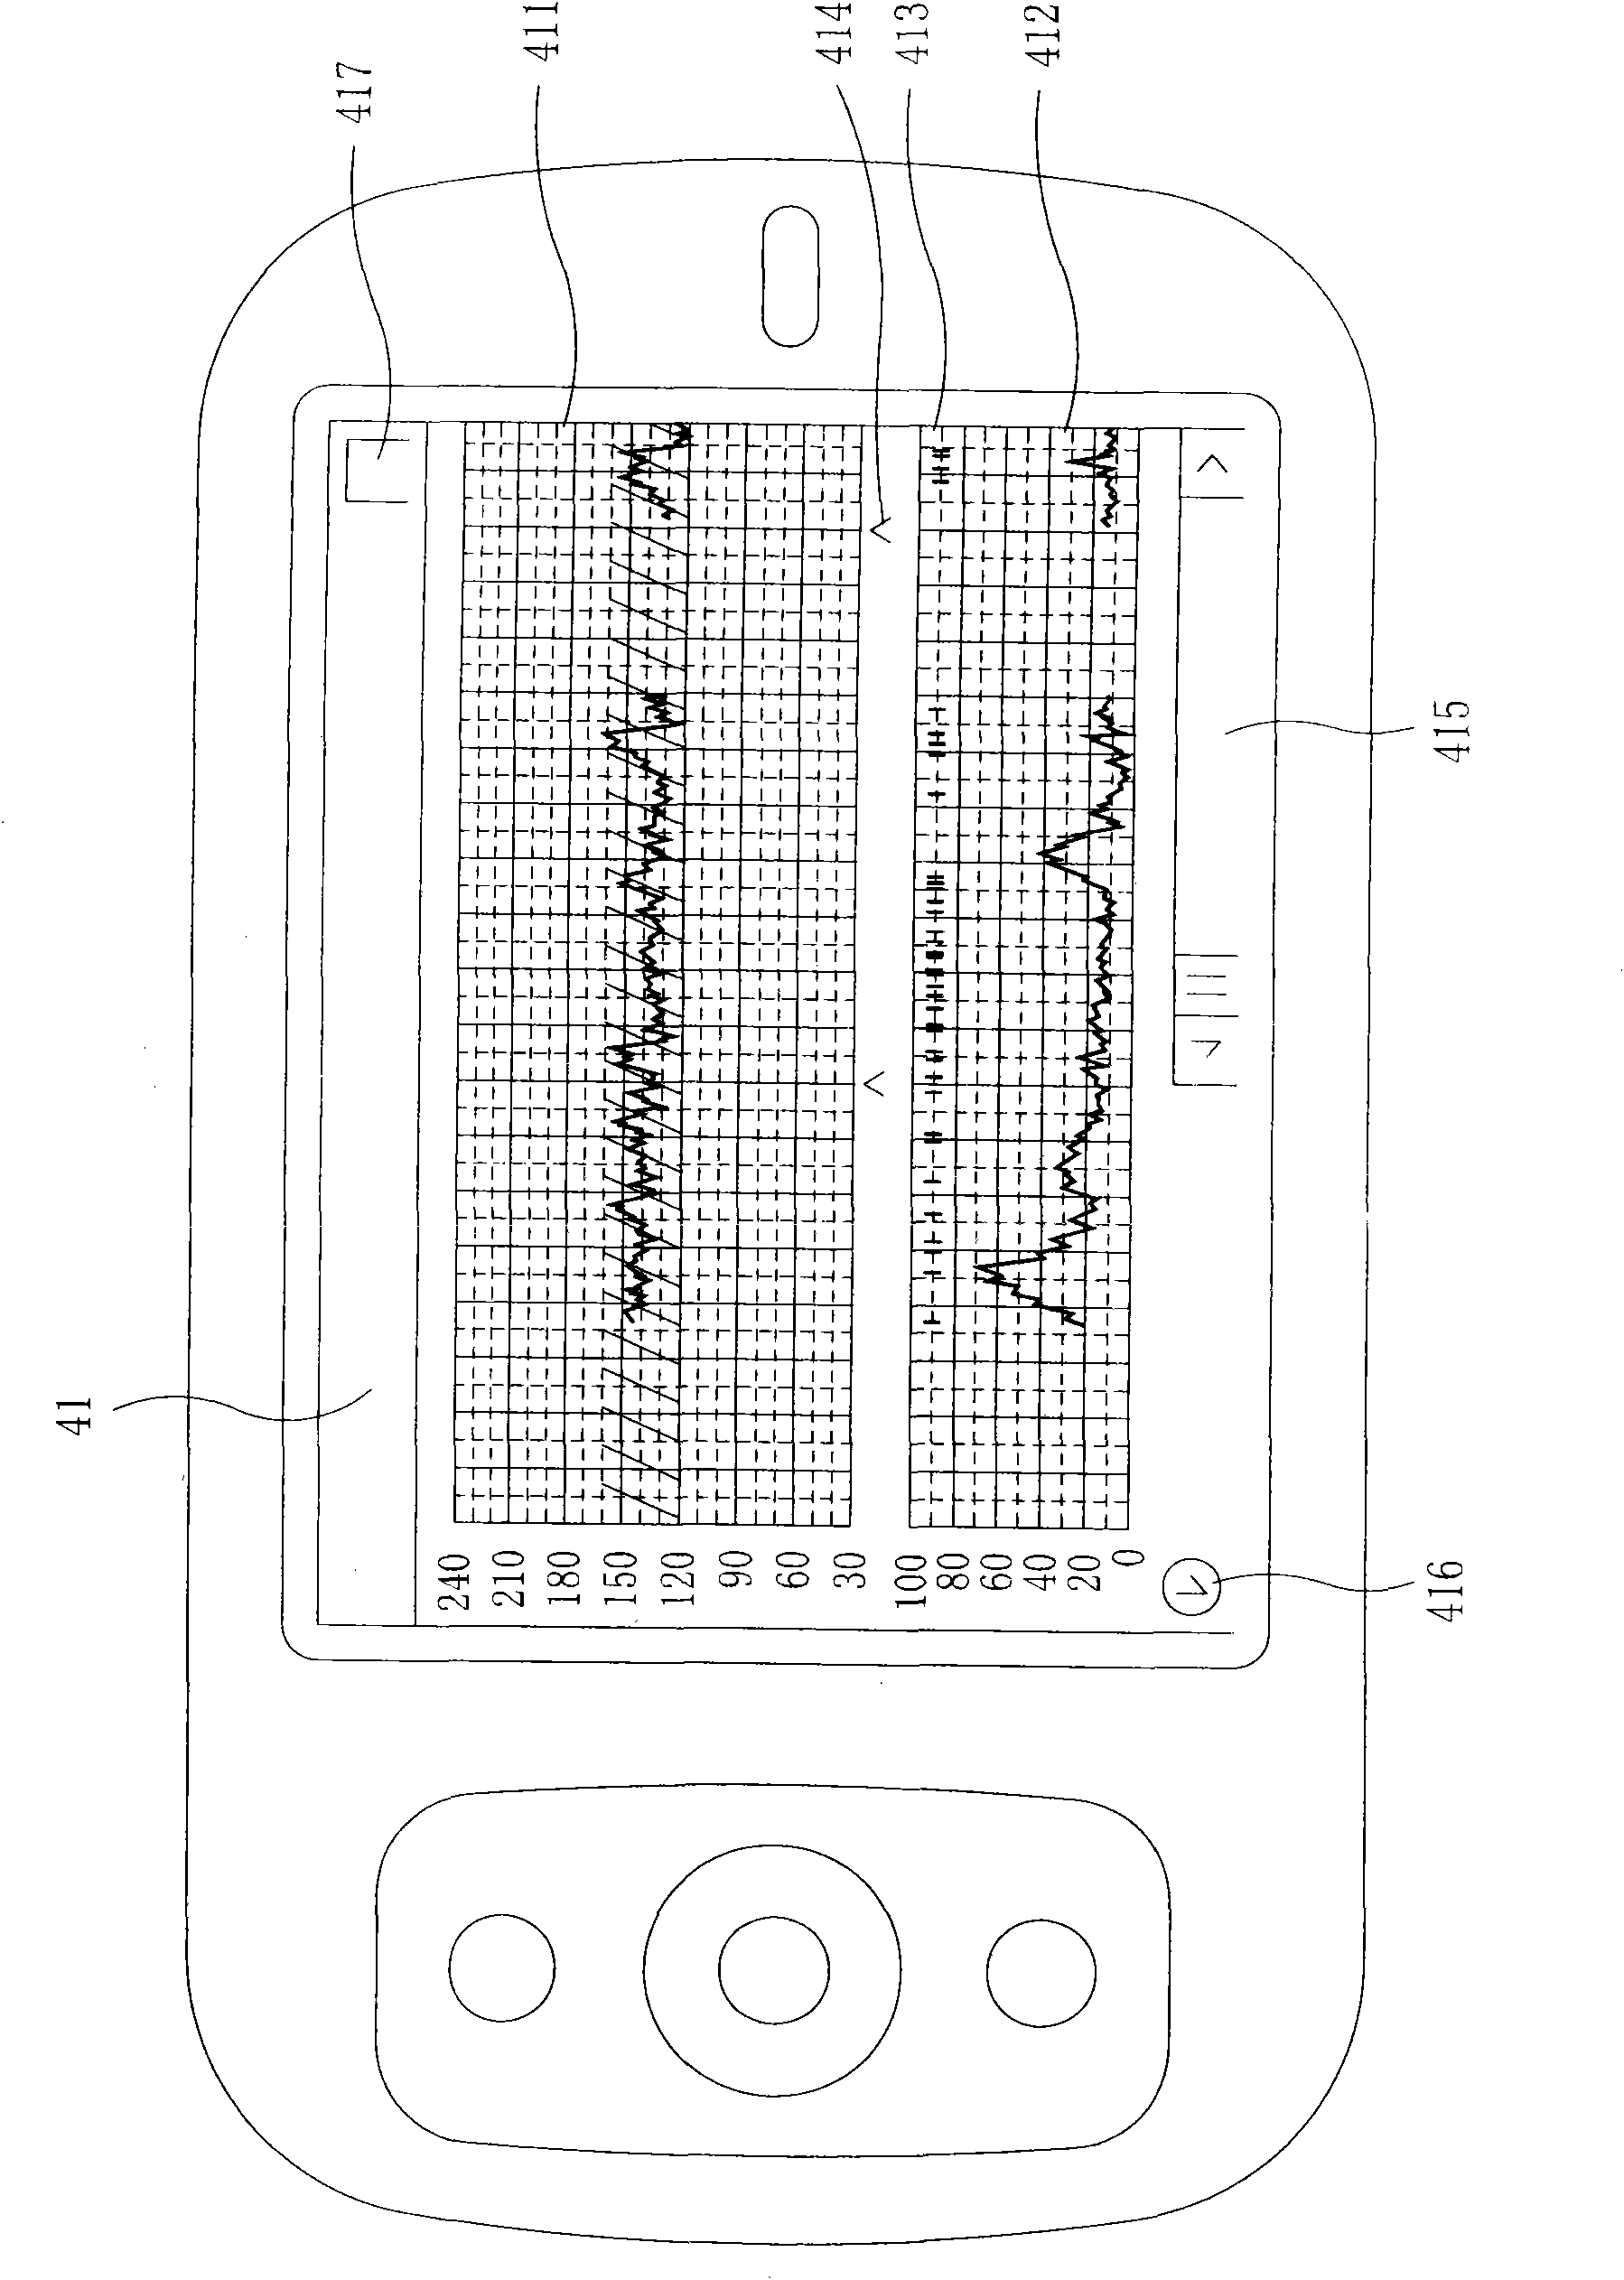 System and method for real-time monitoring and communication of housebound pregnant woman